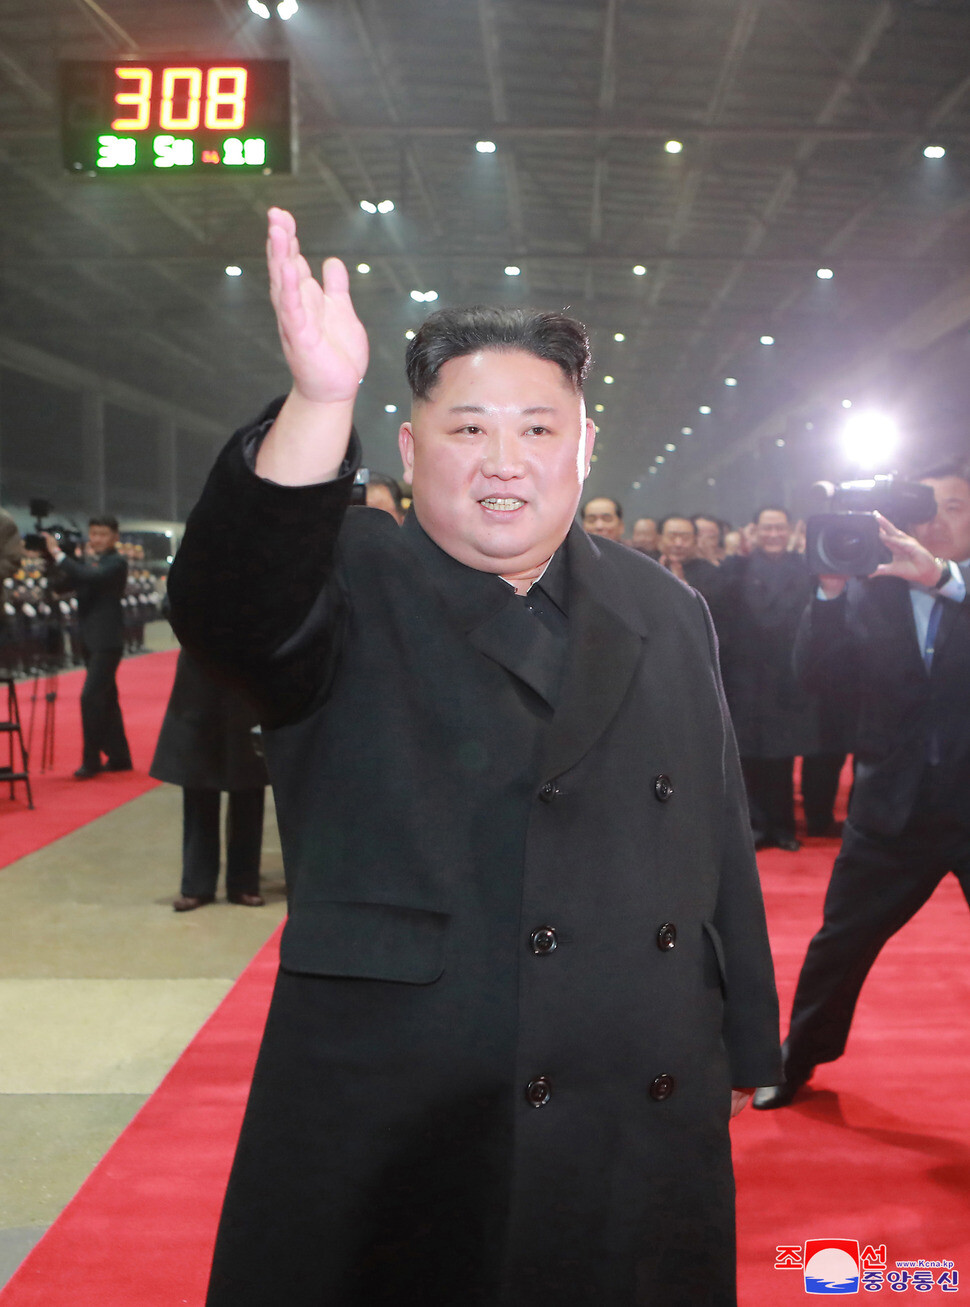 North Korea’s Korean Central News Agency reported that leader Kim Jong-un arrived in Pyongyang on Mar. 5. (KCNA/Yonhap News)